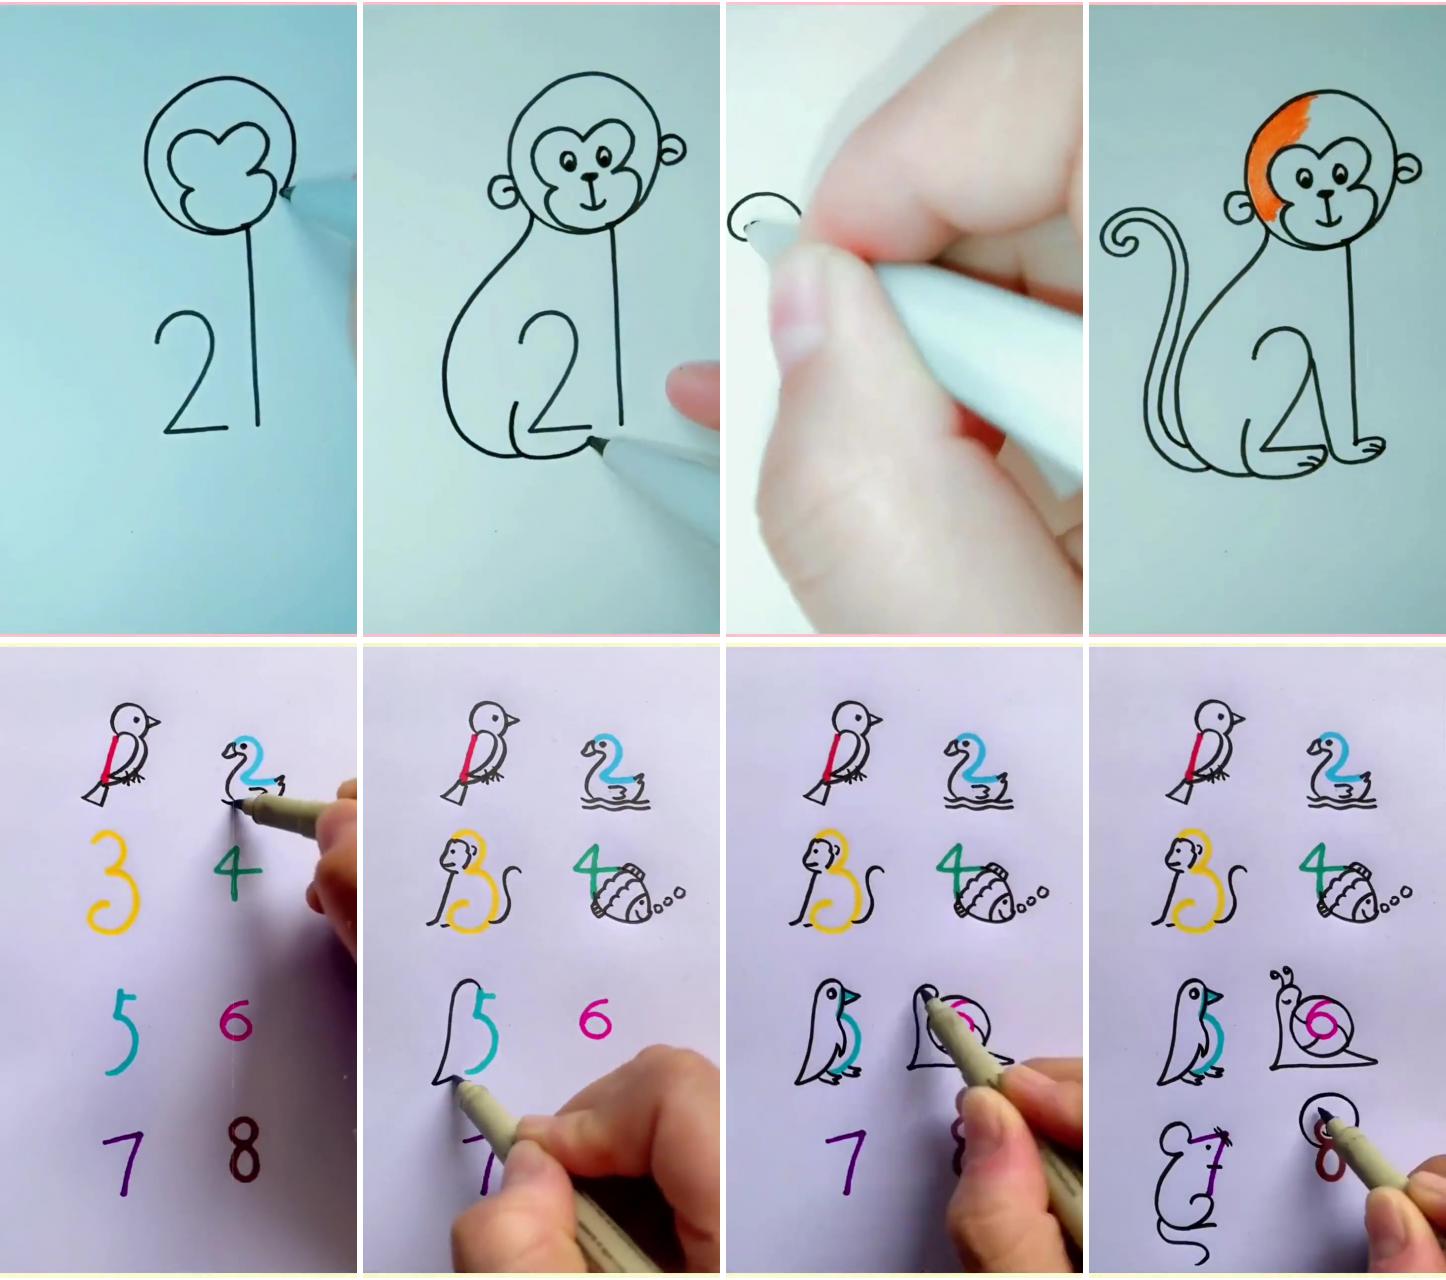 How to draw a monkey using simple lines and shapes | how to draw a animals: beginner and advanced tips